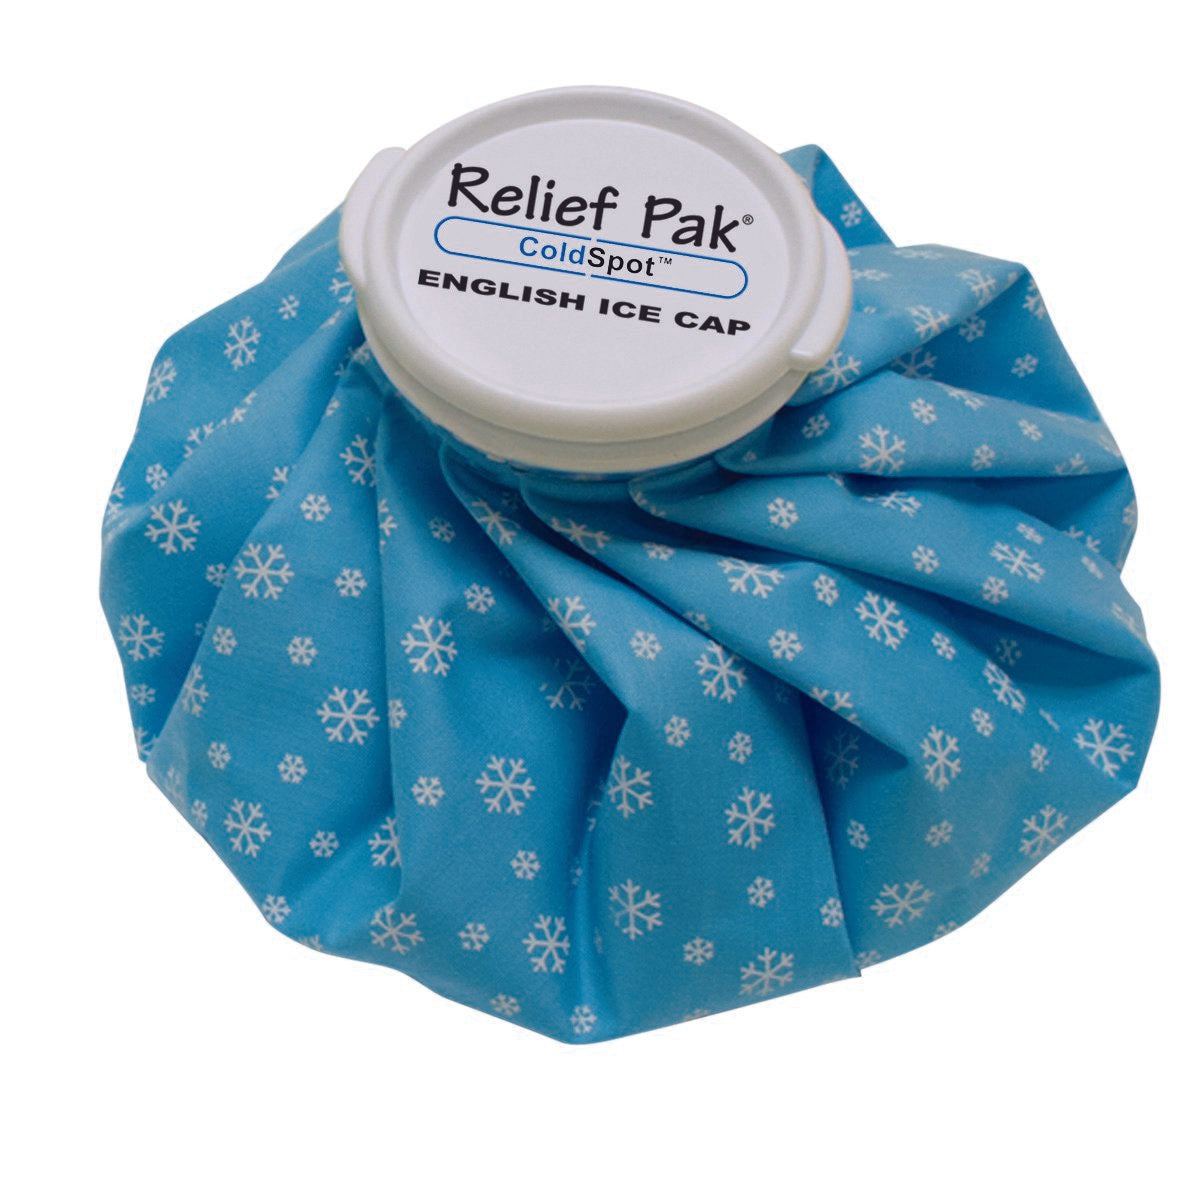 English Style Ice Bag Relief Pak® General Purpose One Size Fits Most 11 Inch Diameter Rubberized Fabric / Plastic Reusable